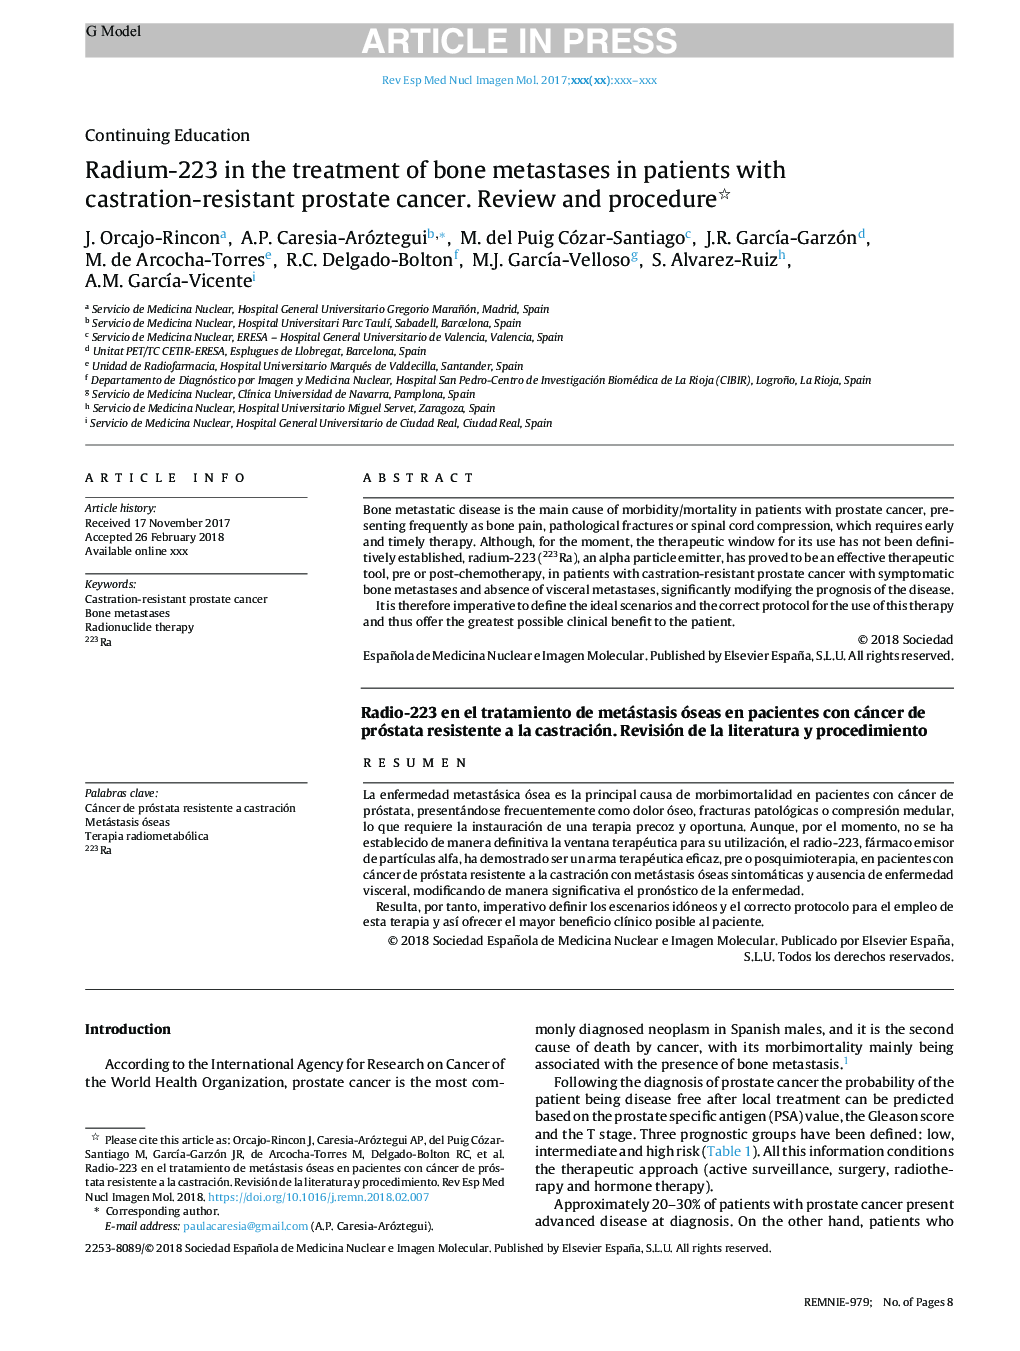 Radium-223 in the treatment of bone metastases in patients with castration-resistant prostate cancer. Review and procedure